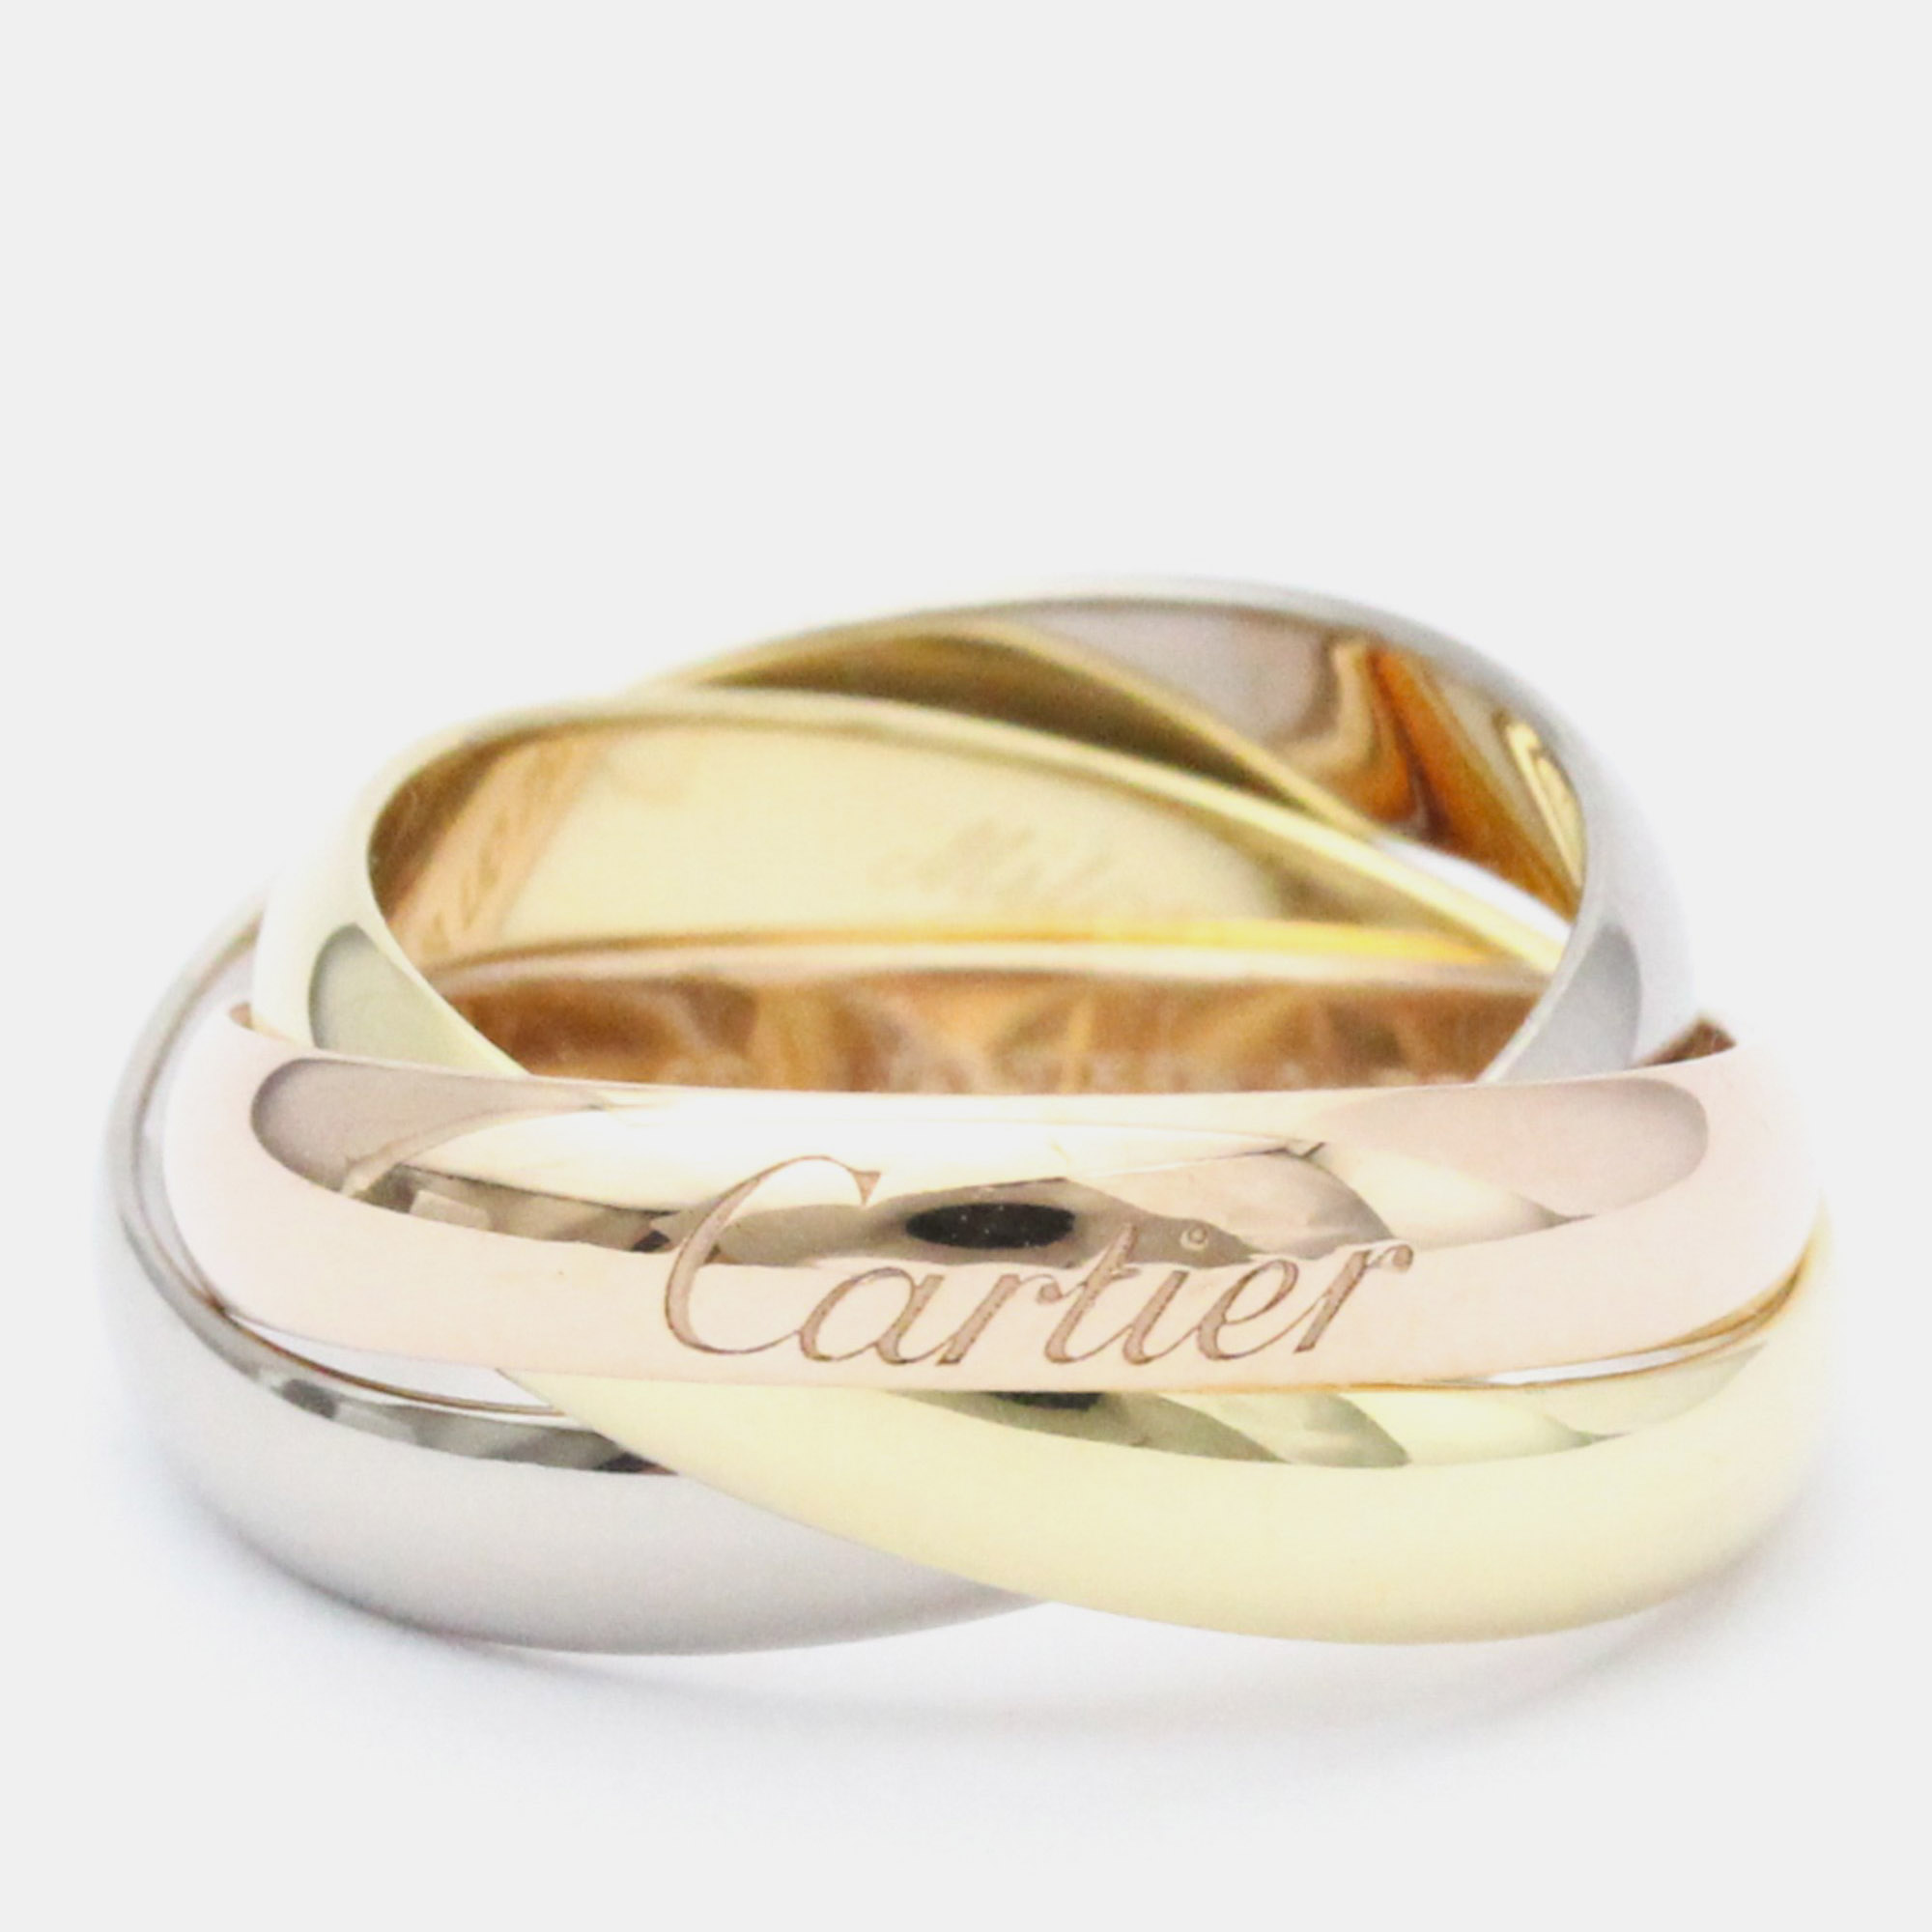 Cartier Trinity 18K Yellow Rose And White Gold Ring EU 49